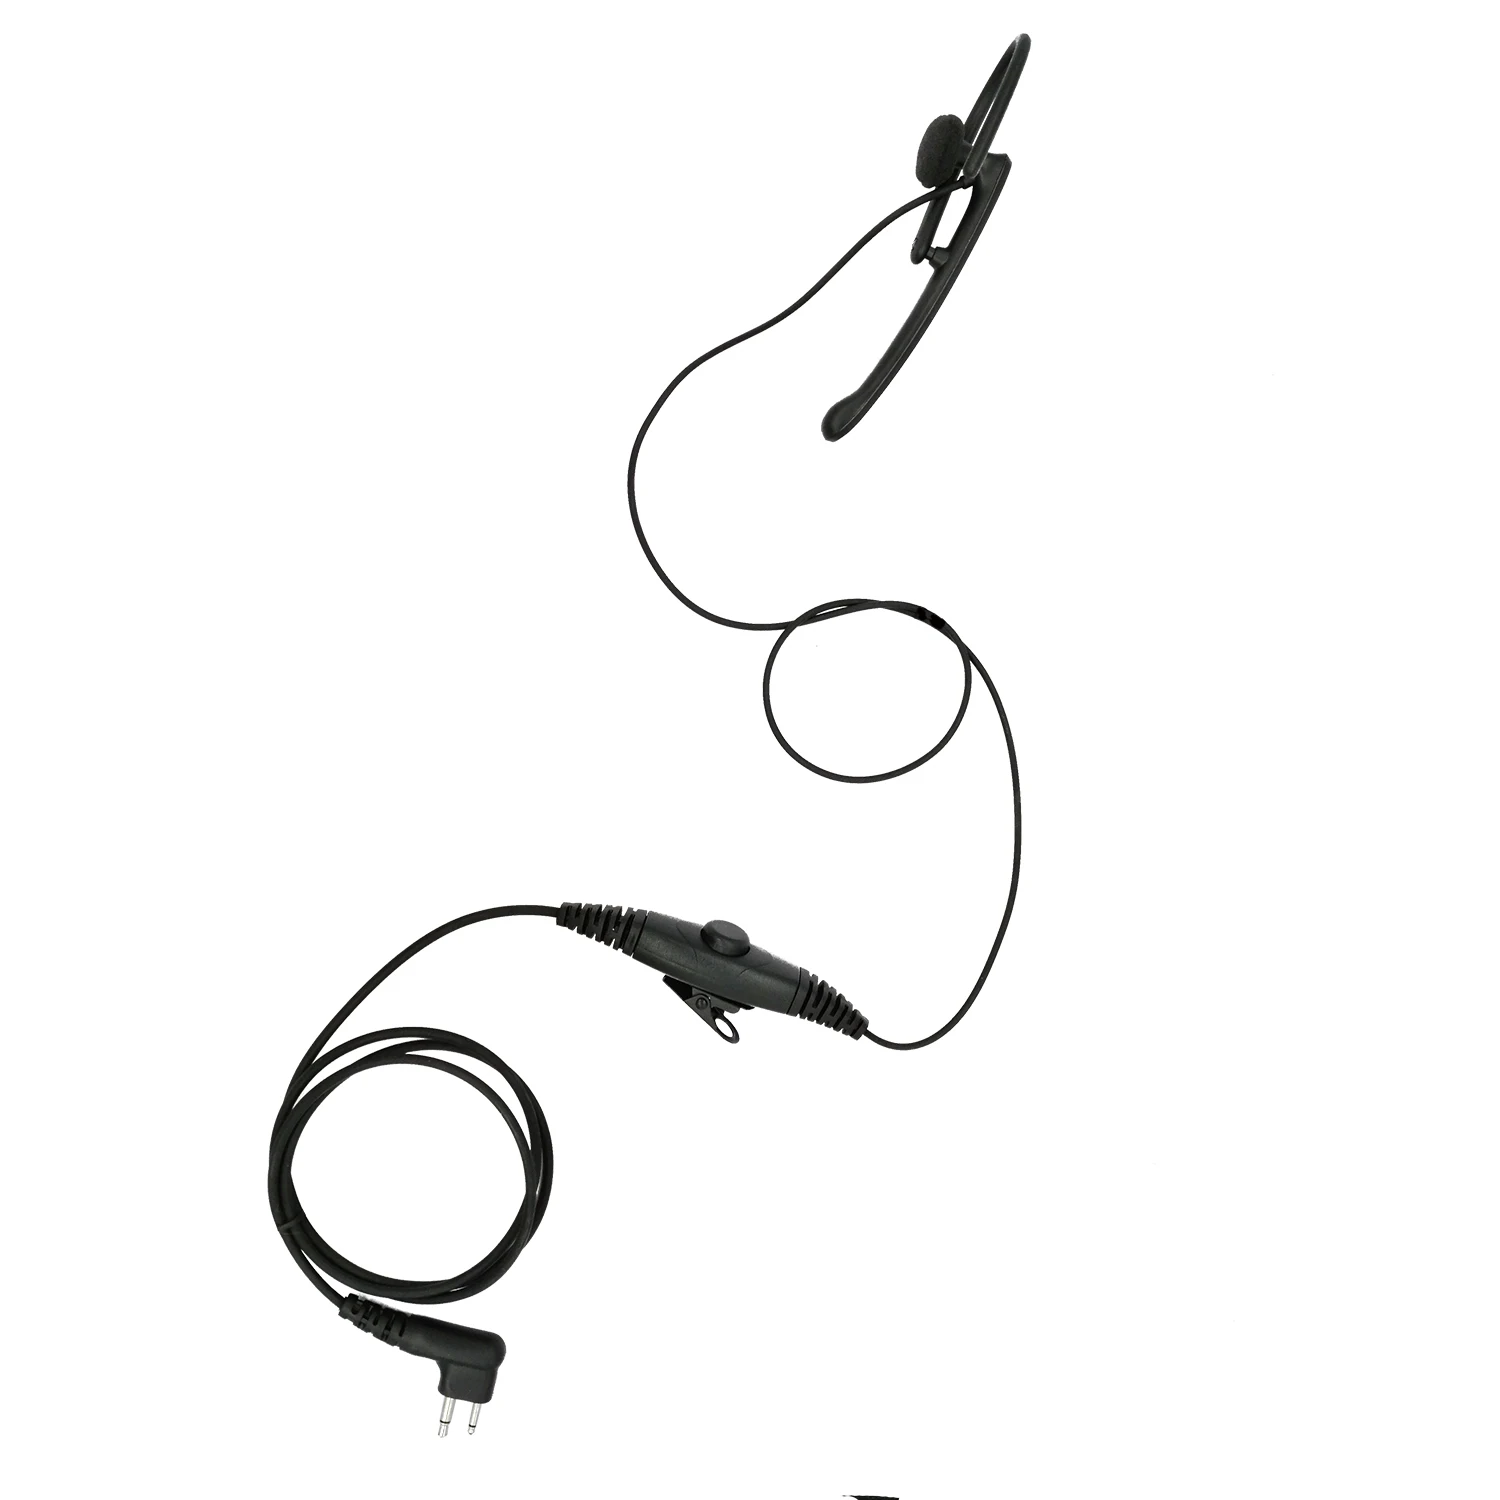 Two-way monitor headset is suitable for MOTOROLA XV1100,XV2100,VL130 and other models